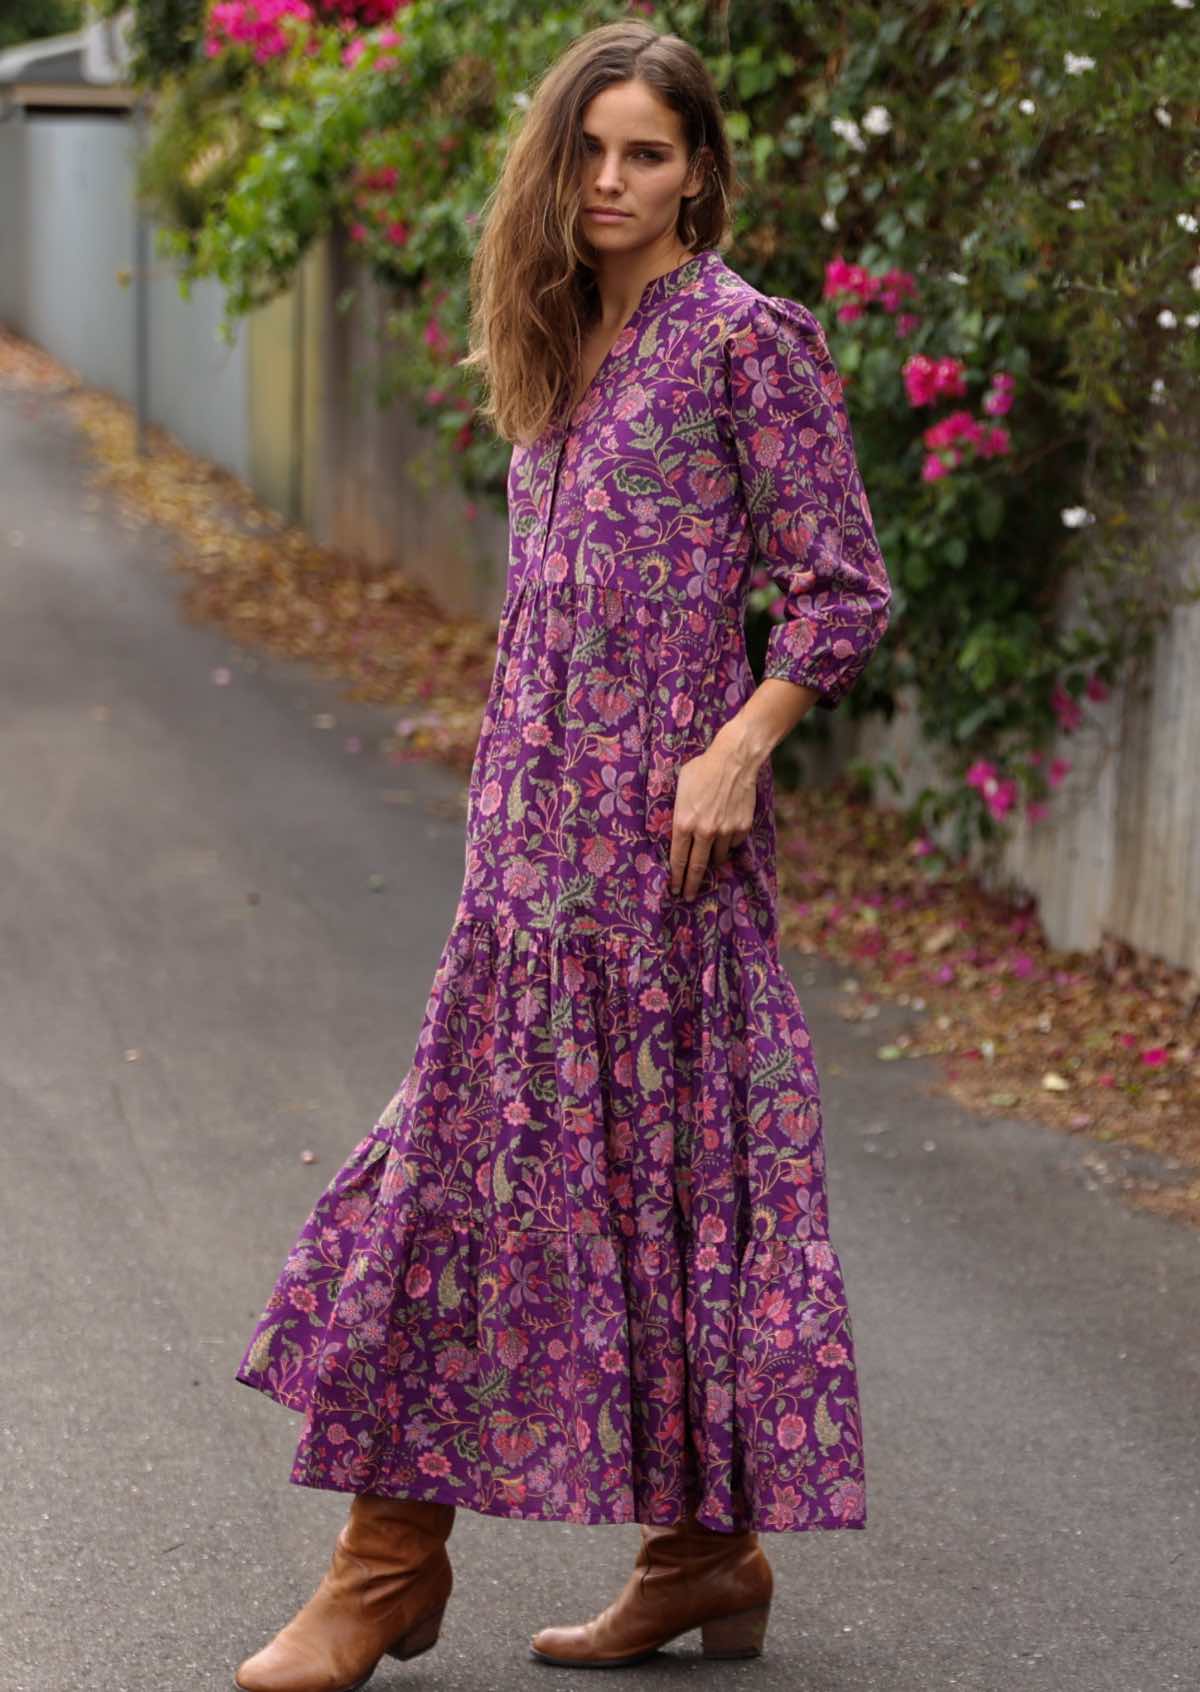 100% cotton maxi dress with 3/4 sleeves and buttoned bodice and hidden side pockets